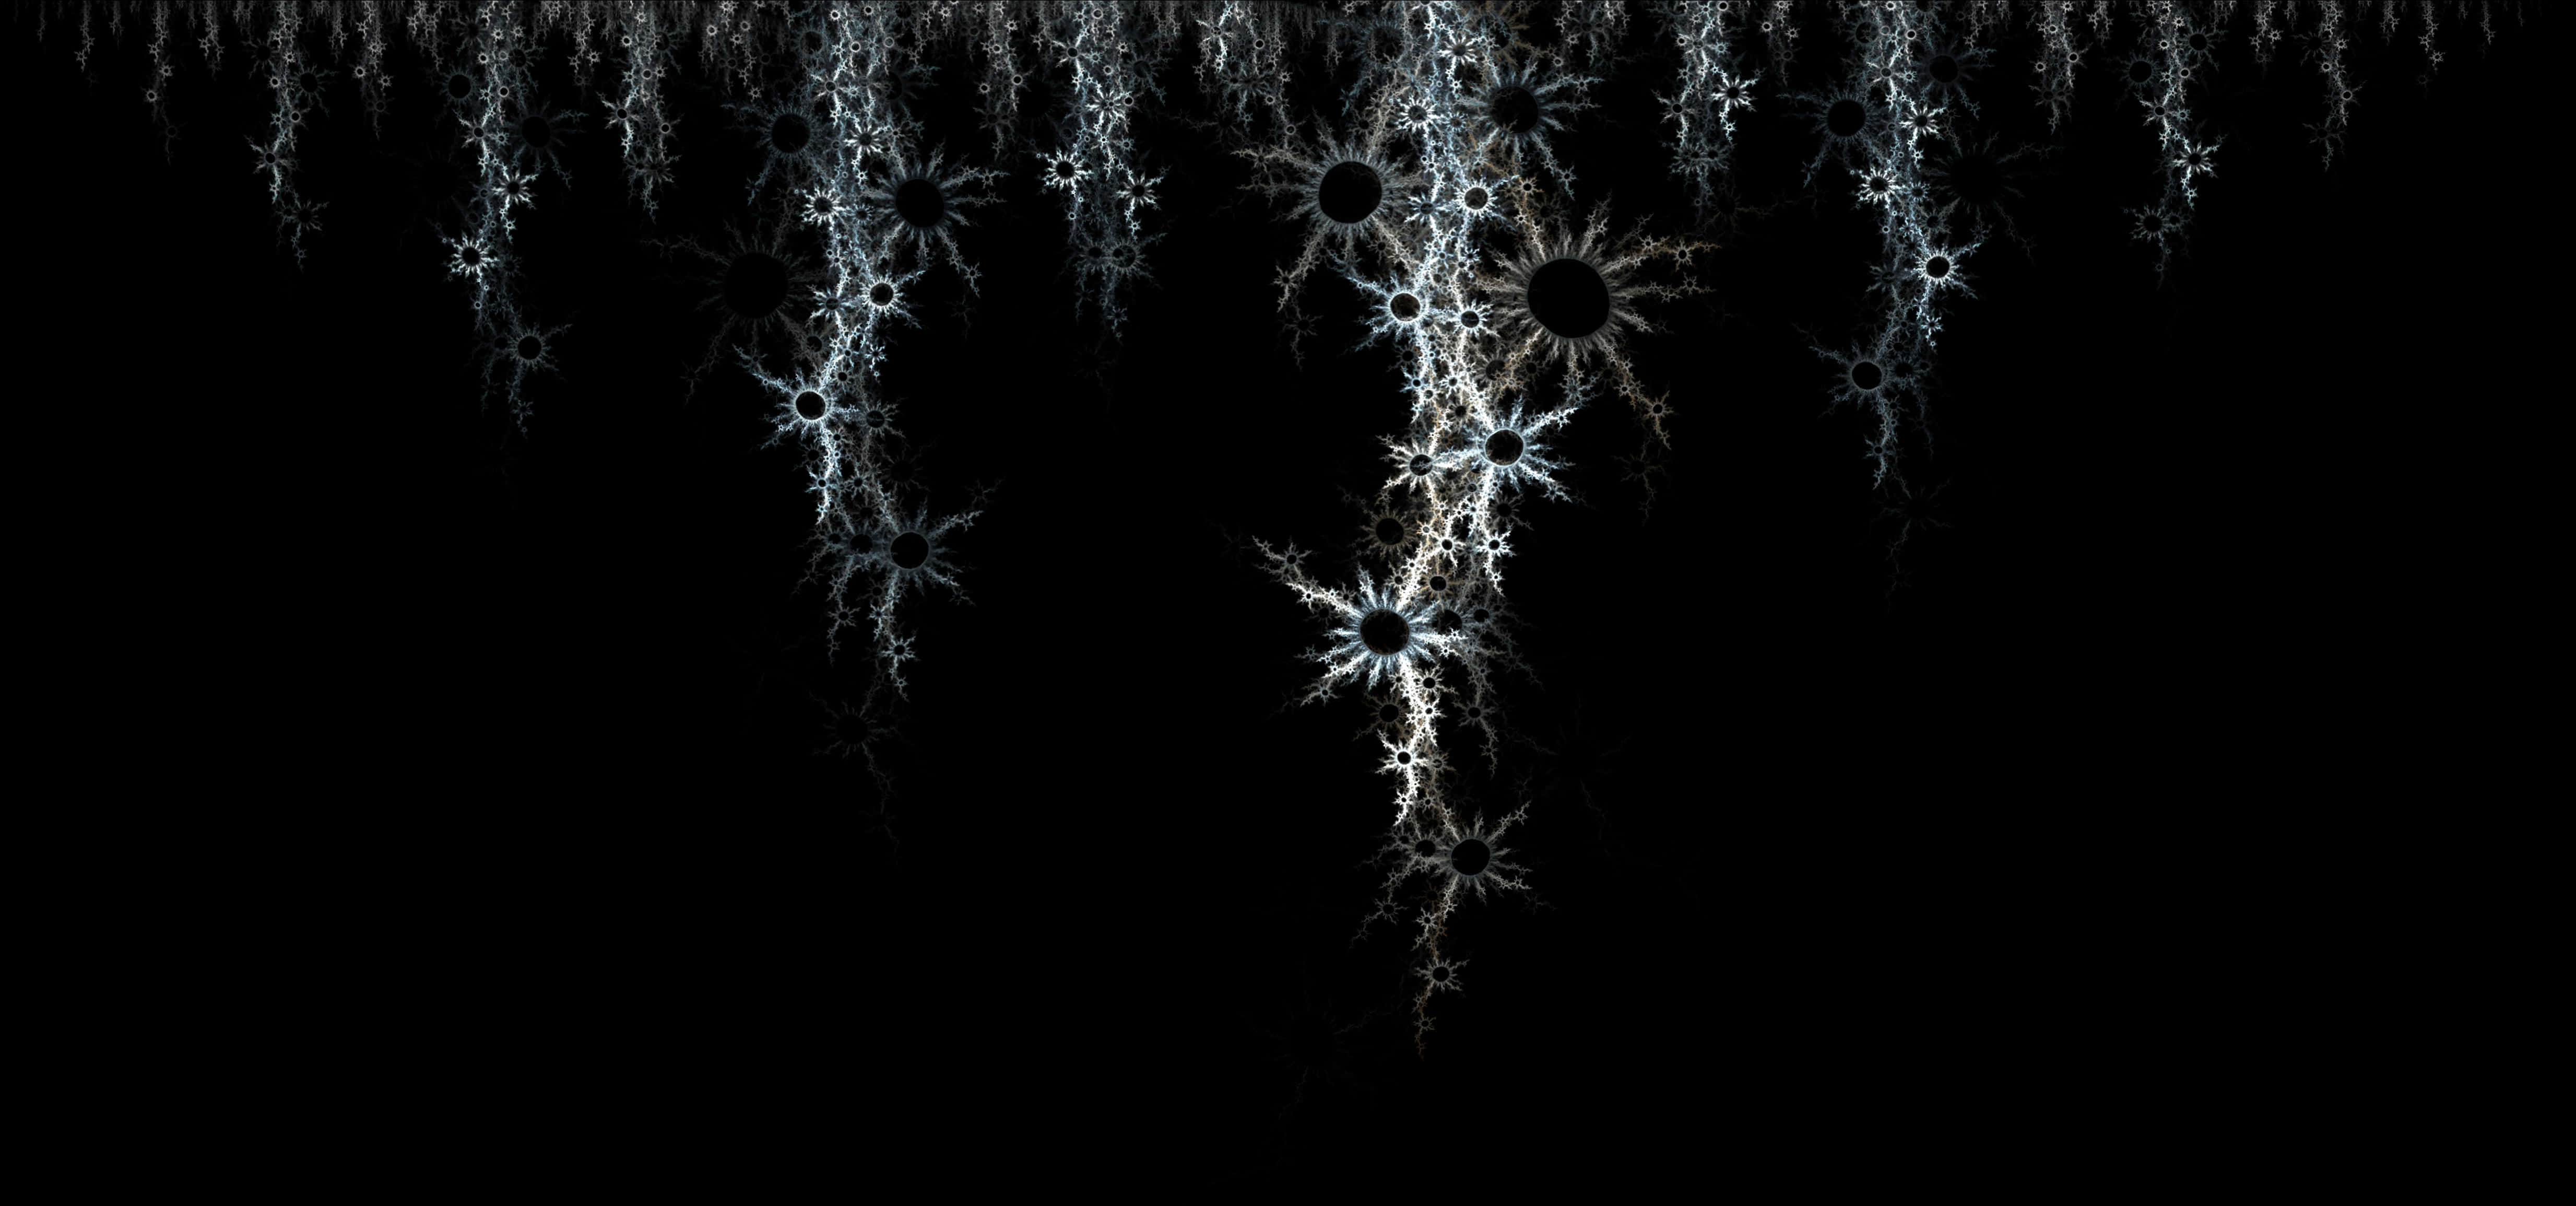 A Black Background With White And Grey Snowflakes